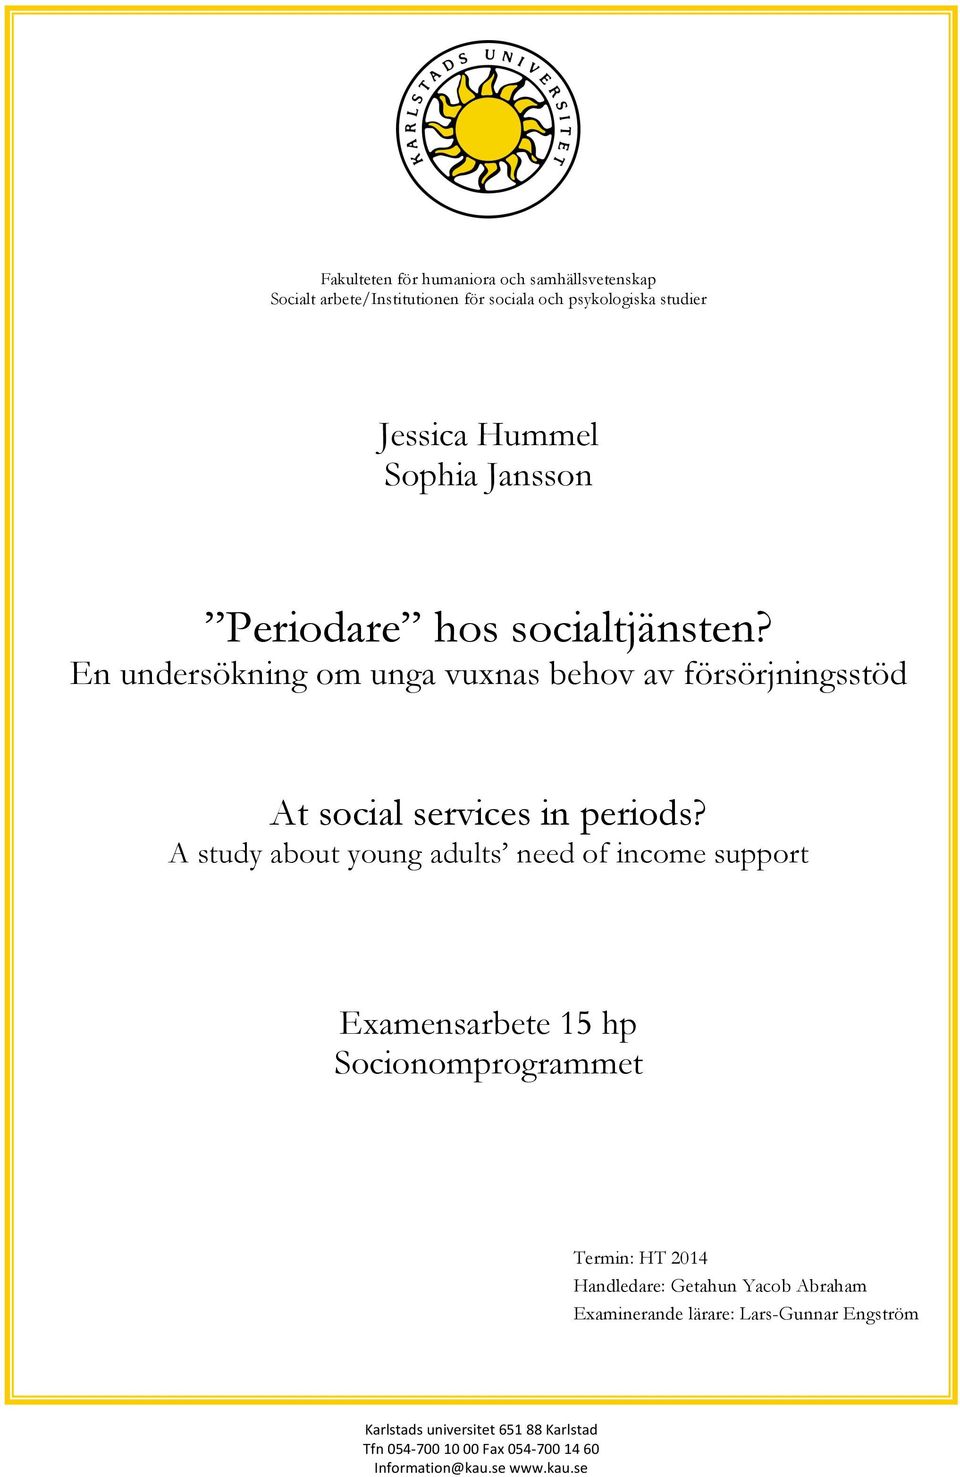 A study about young adults need of income support Examensarbete 15 hp Socionomprogrammet Termin: HT 2014 Handledare: Getahun Yacob